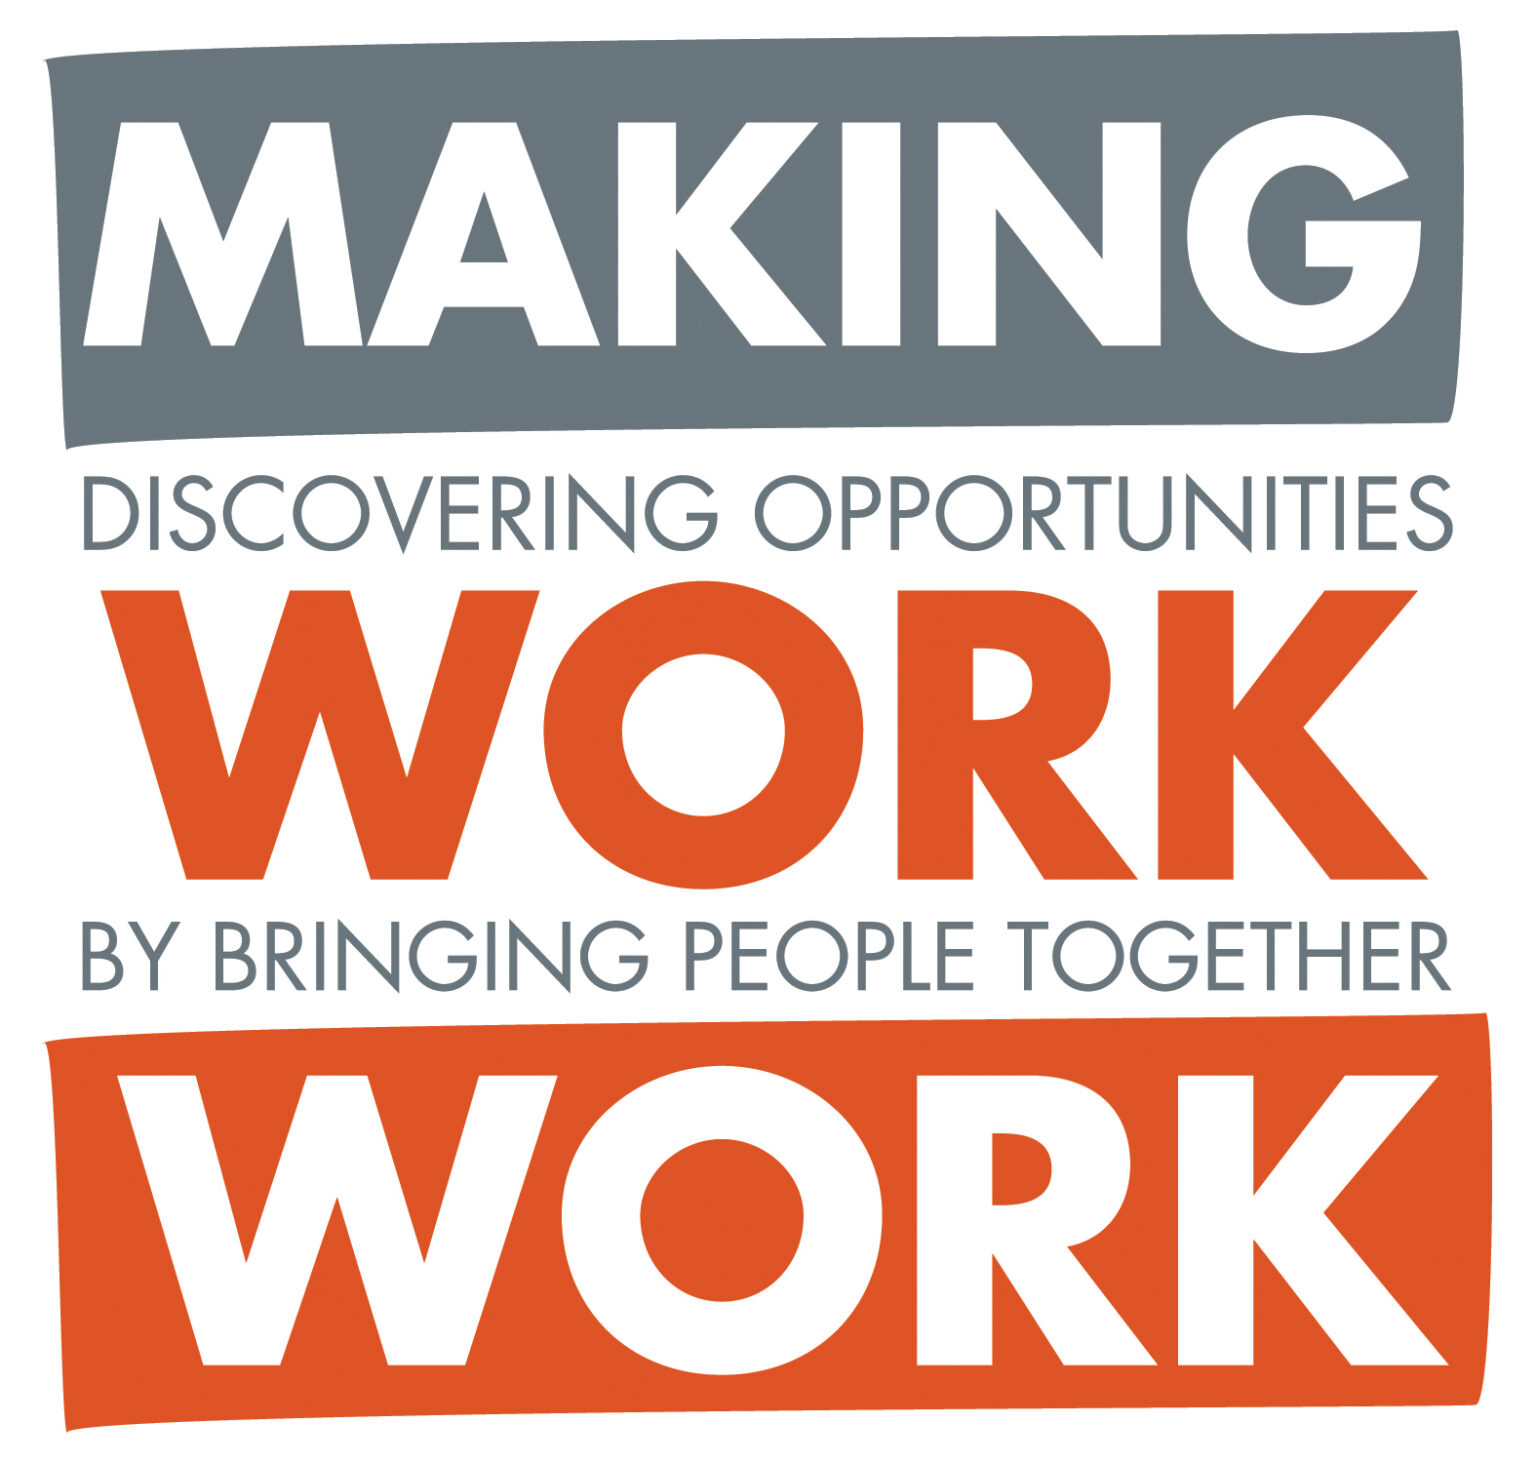 Making Work Work, Discovering Opportunities by Bringing People Together.